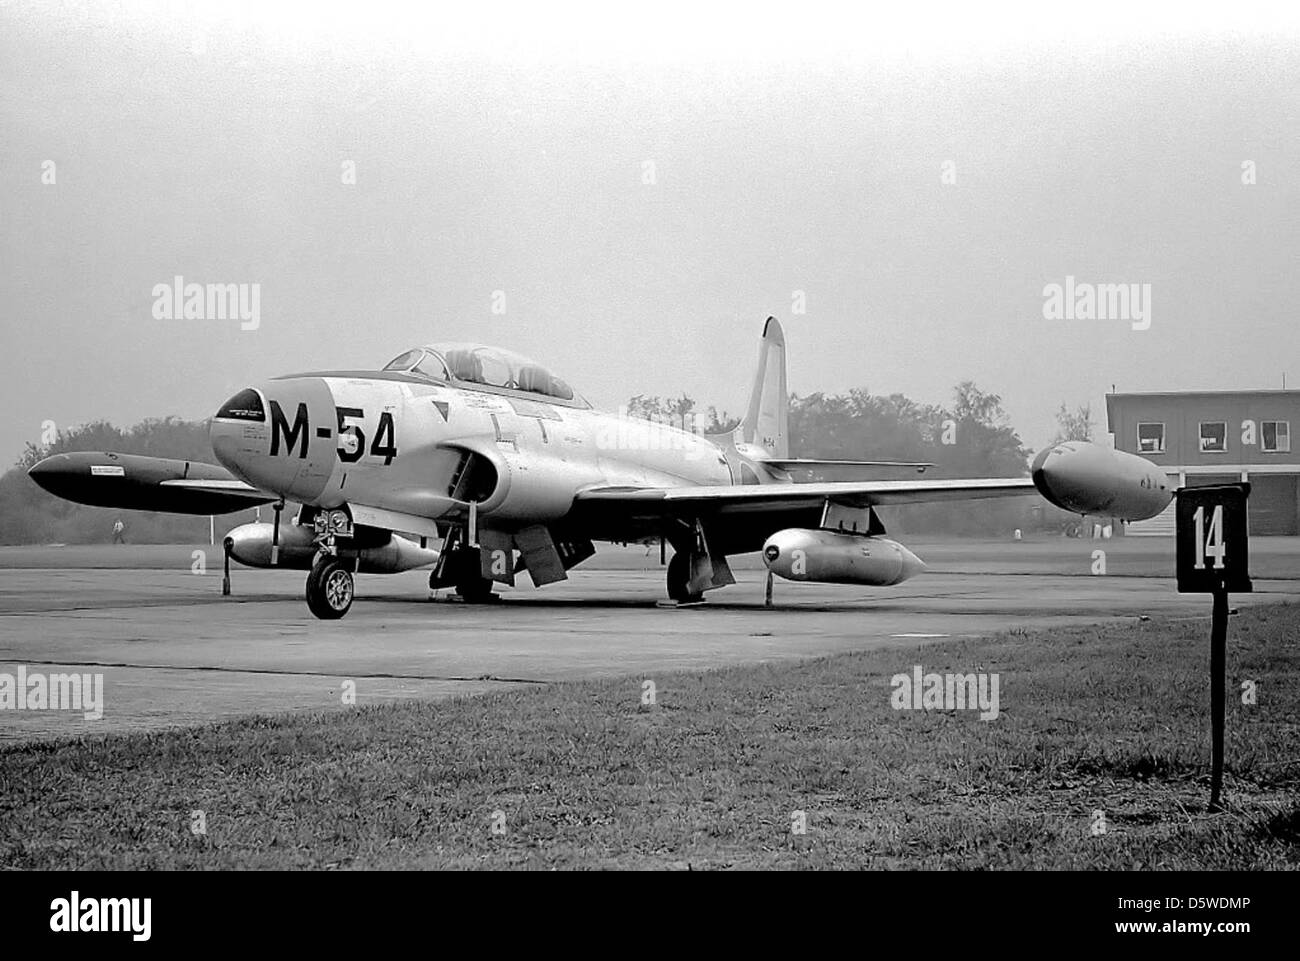 Lockheed T-33 "Shooting Star" showing chaff dispensers under wing. Stock Photo